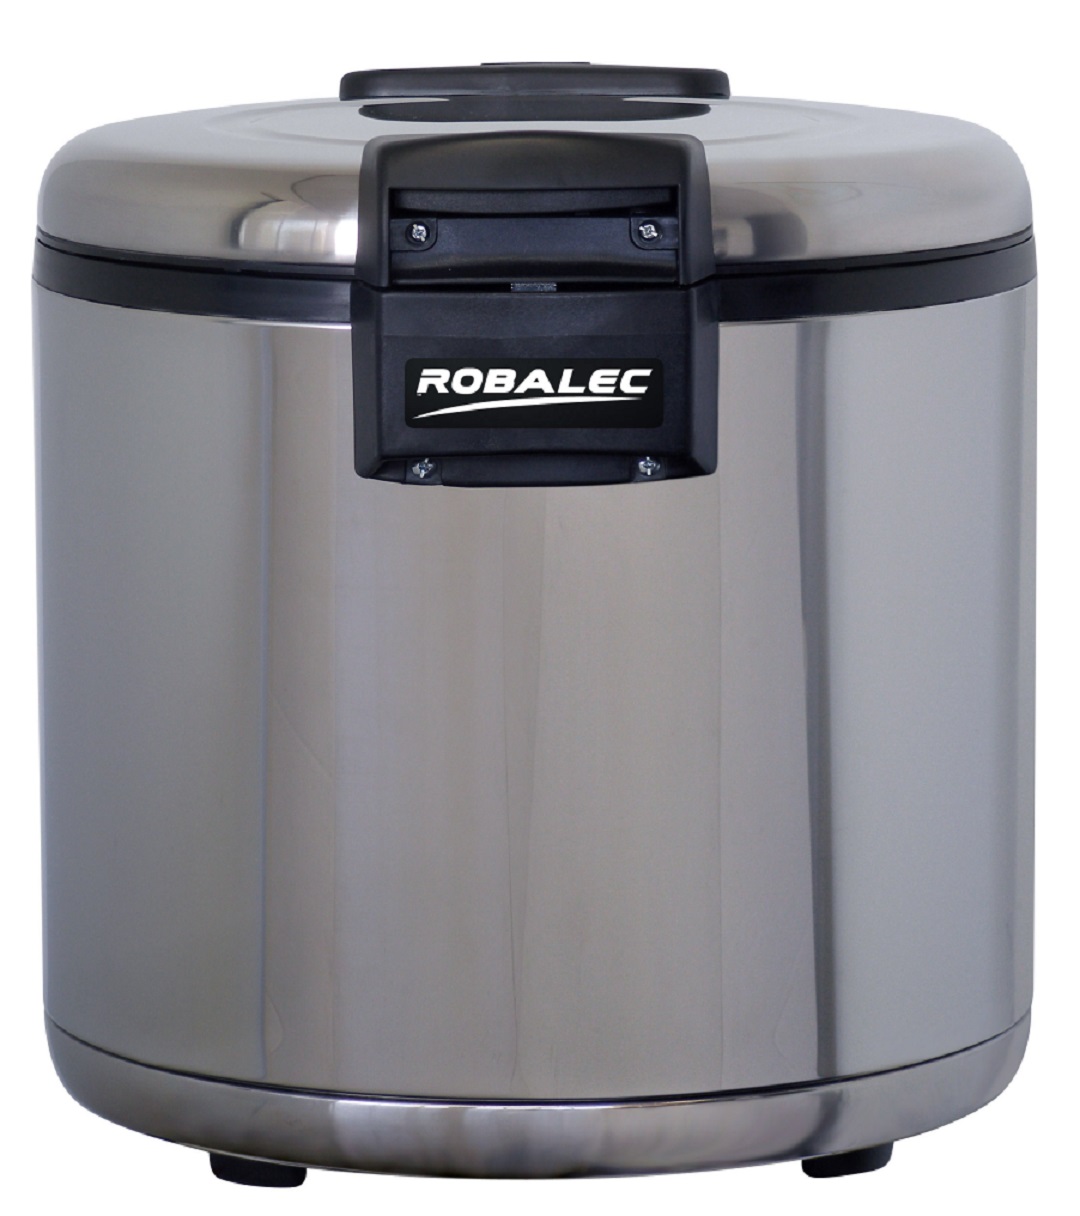 Roband Robalec 5RSW5400 30 Portion Rice Cooker